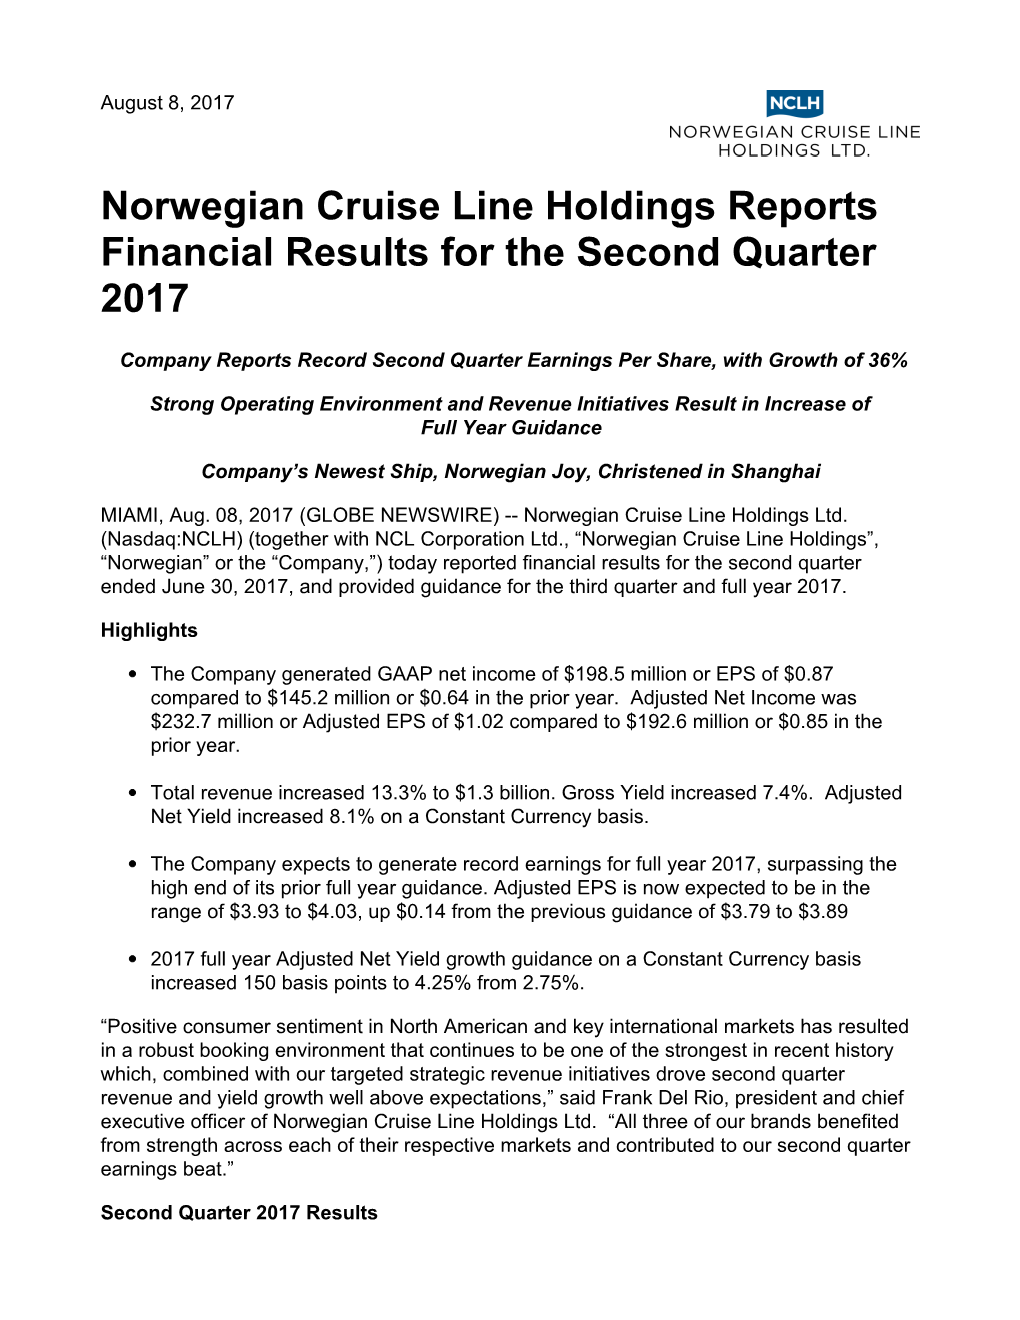 Norwegian Cruise Line Holdings Reports Financial Results for the Second Quarter 2017